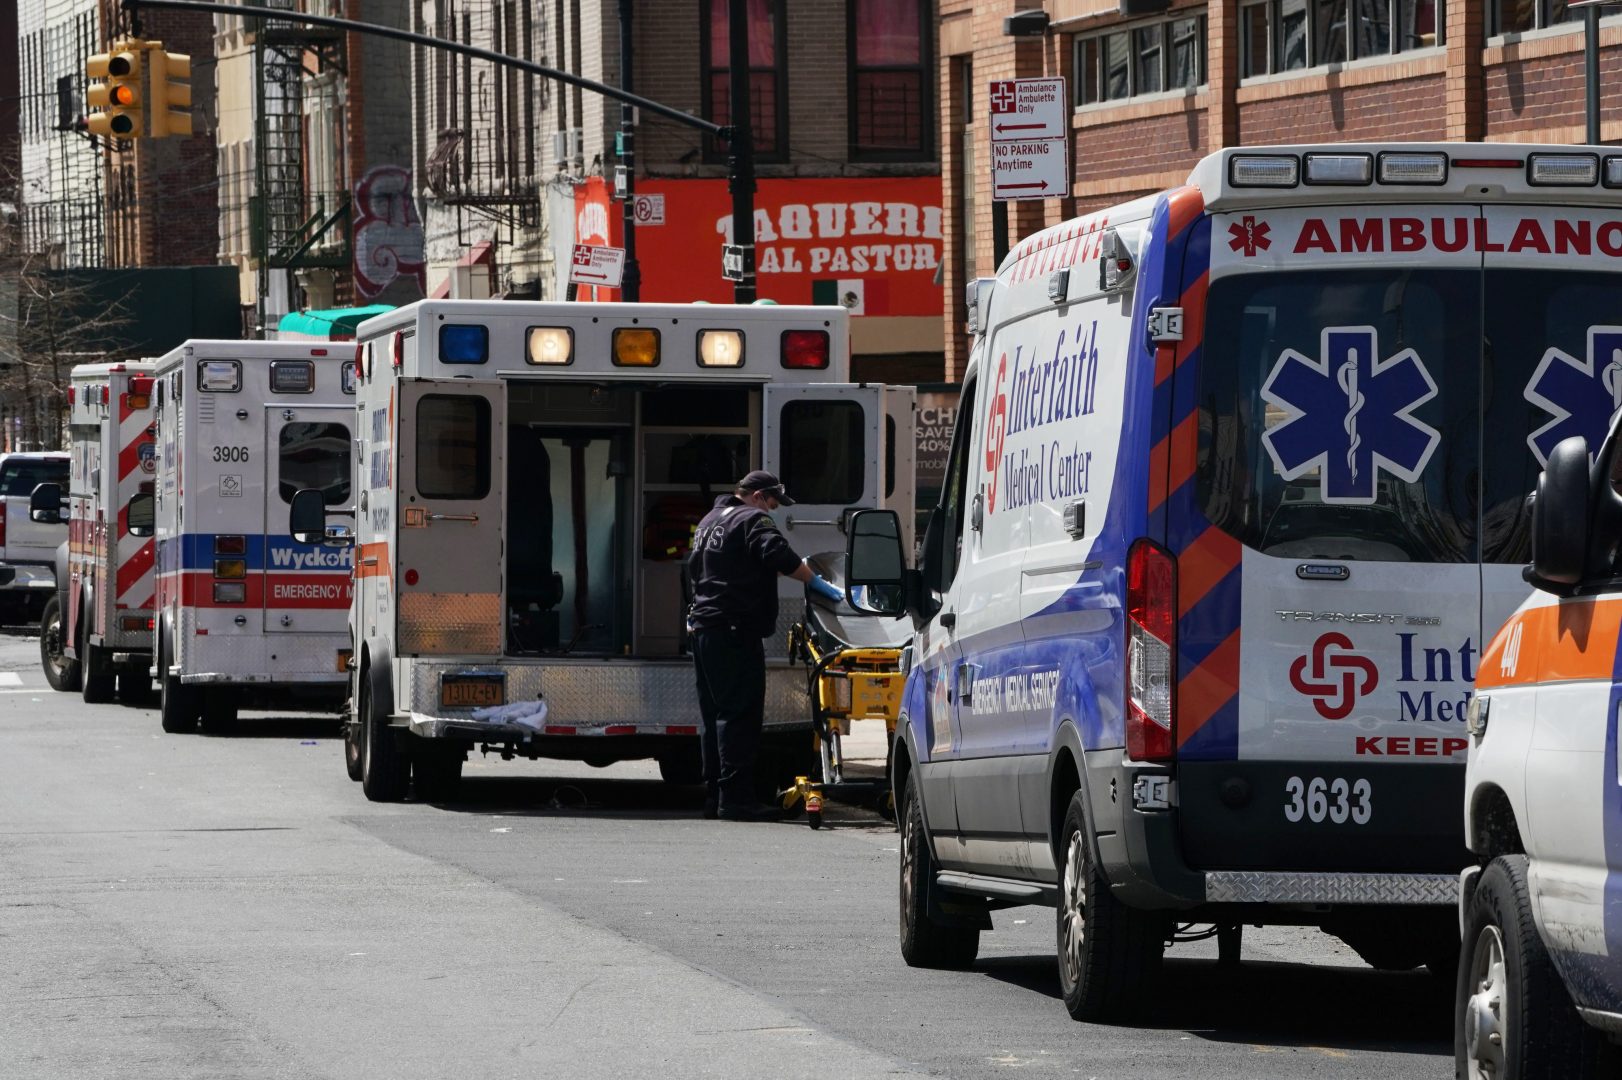 Ambulances are parked outside of Wyckoff Hospital in the Brooklyn, N.Y., on April 4. A study published by the CDC finds that people in the United States under the age of 18 are far less likely to fall ill with COVID-19 or require intensive care, compared with older Americans.